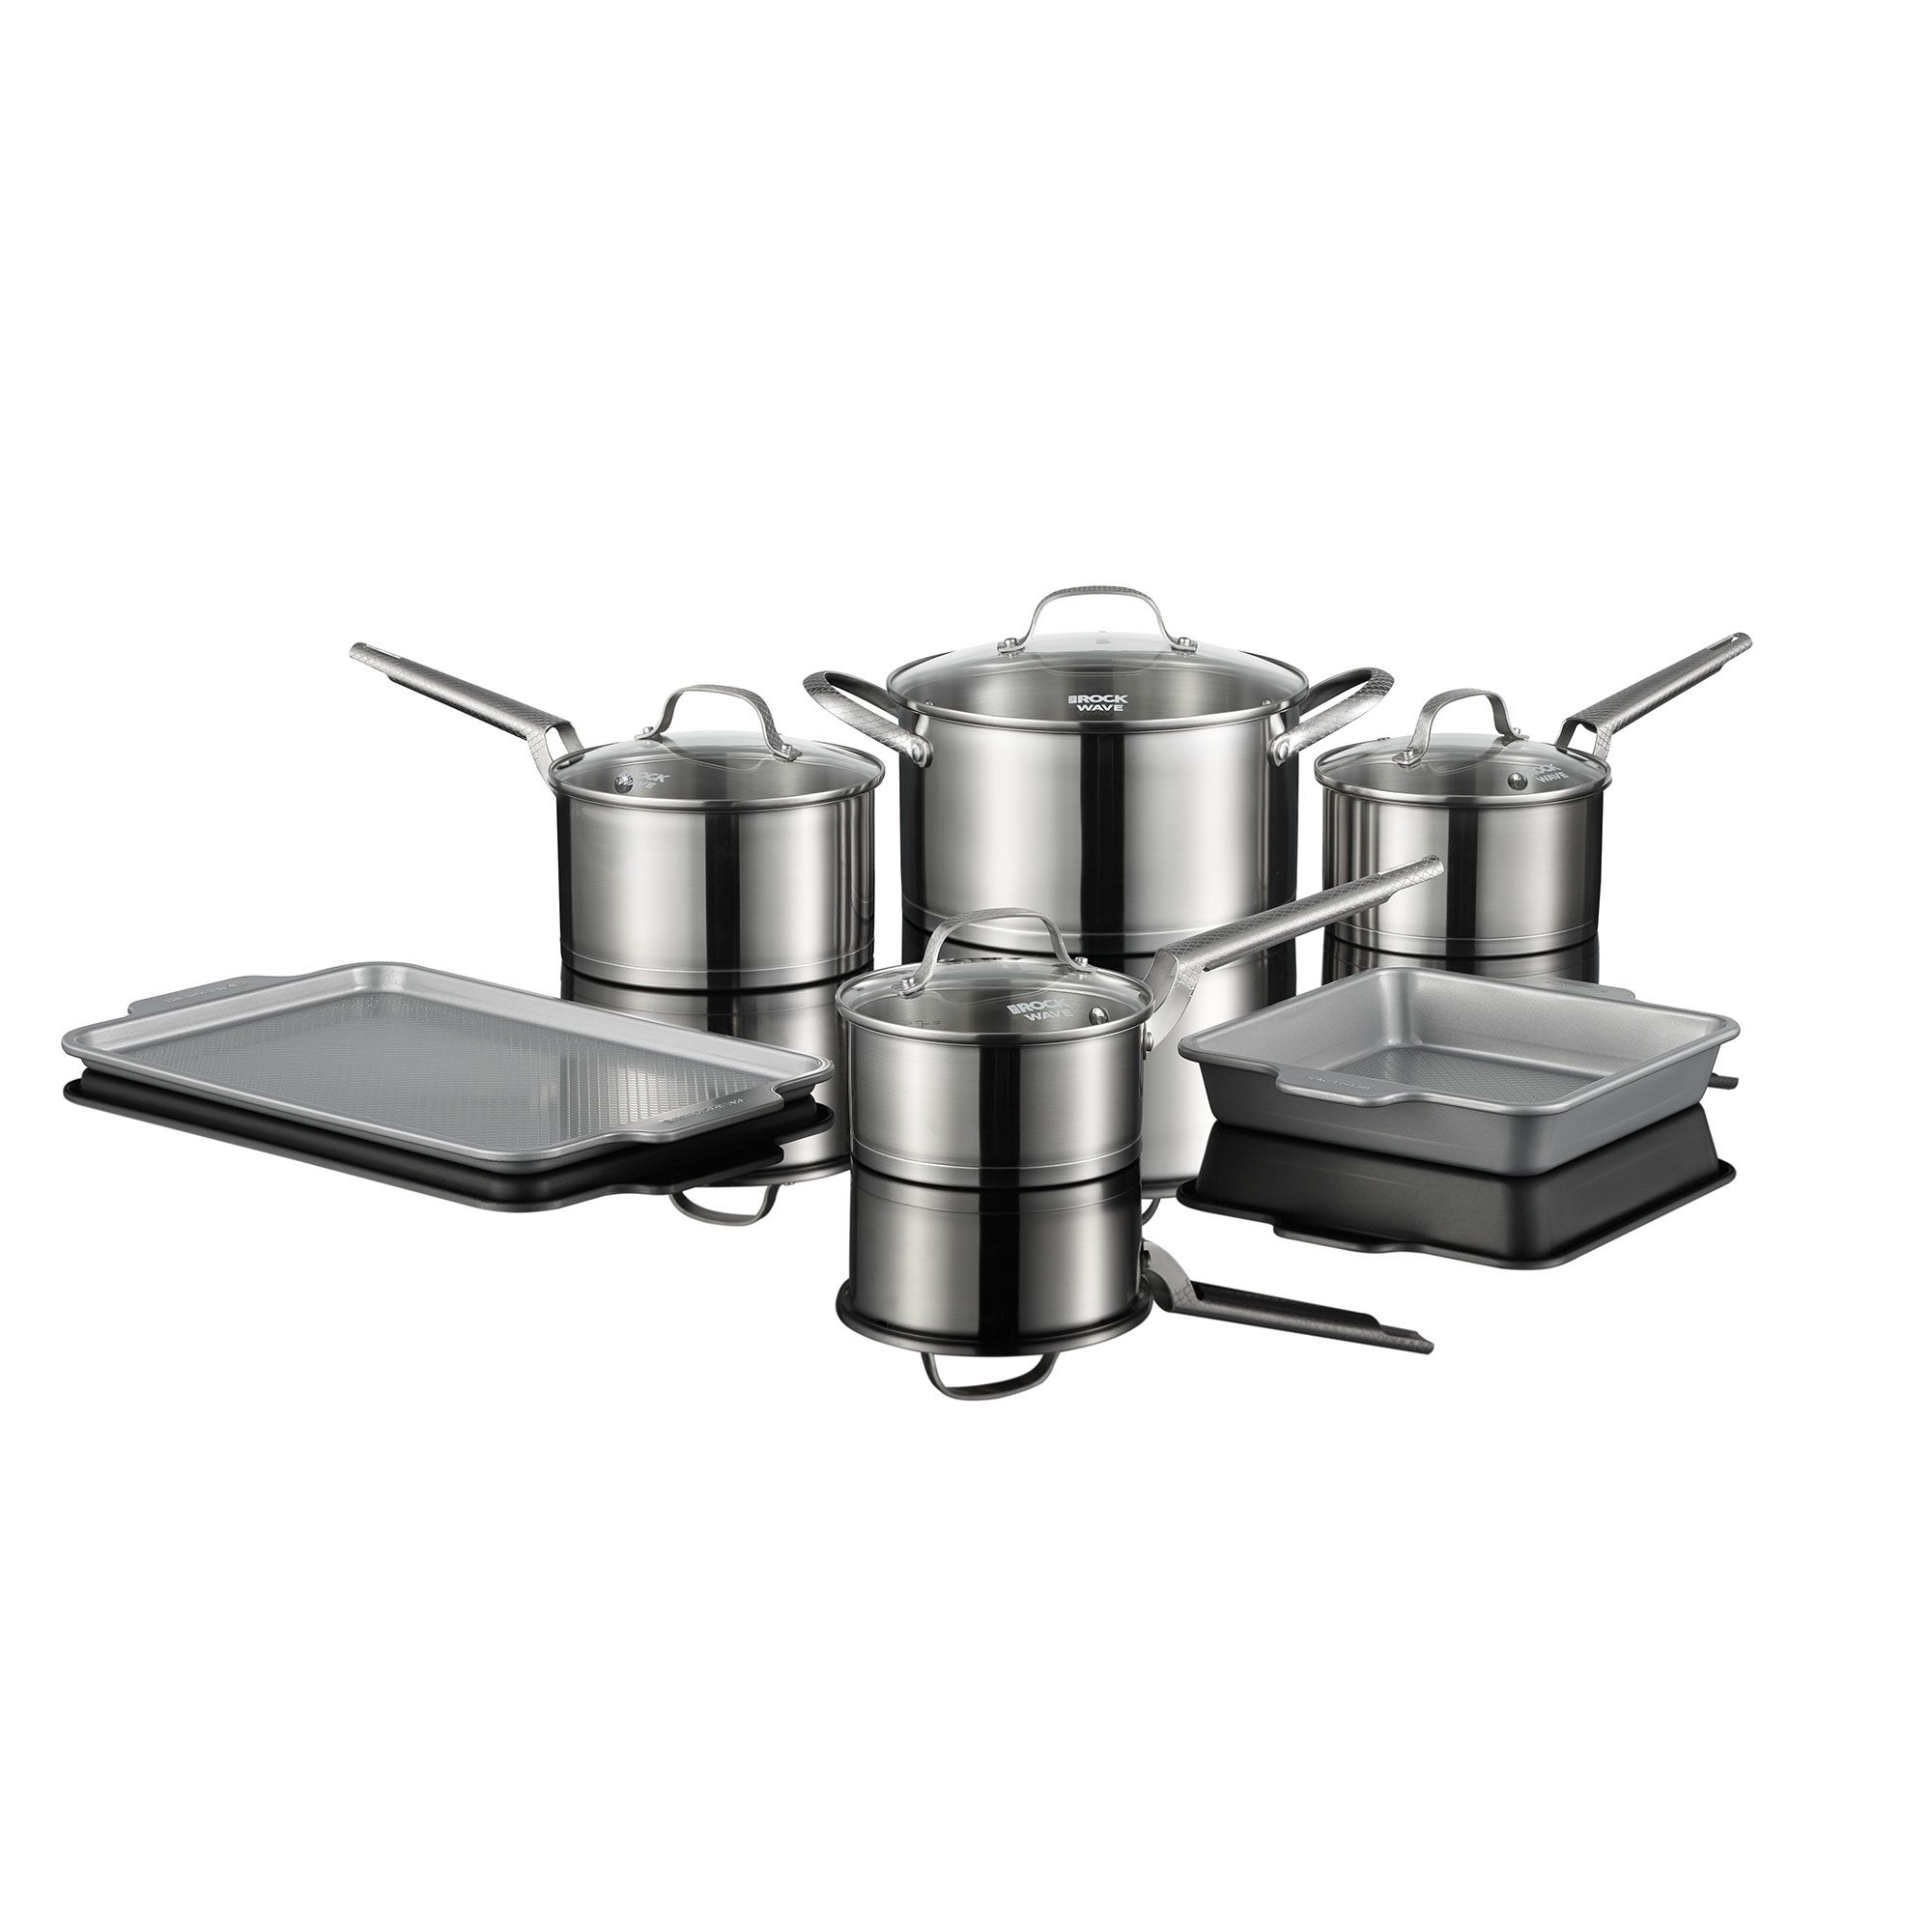 The Rock by Starfrit 10-Piece Cookware Set